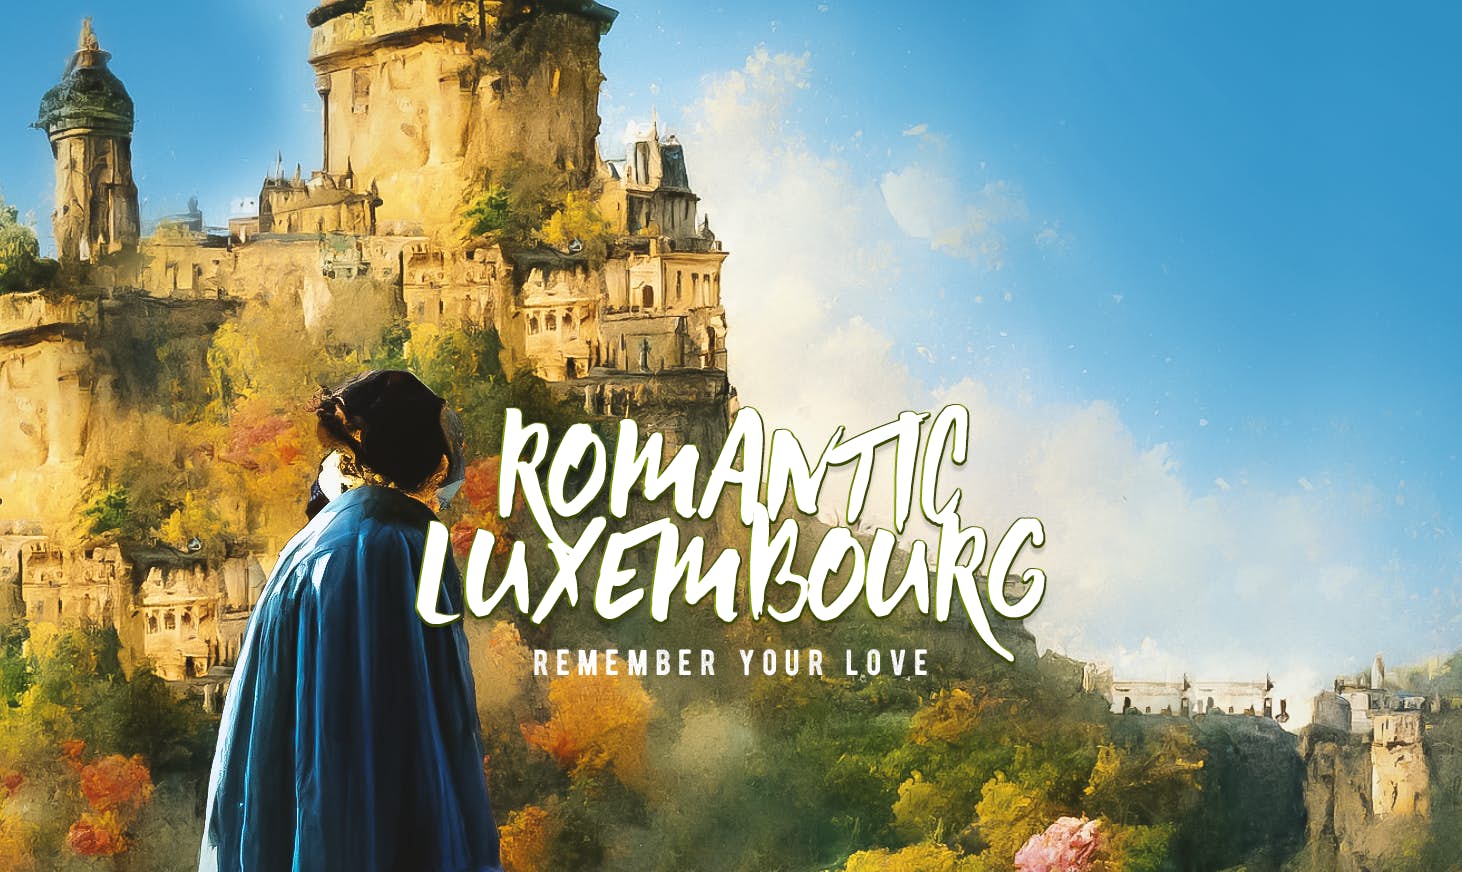 Romantic Luxembourg: Remember your love image